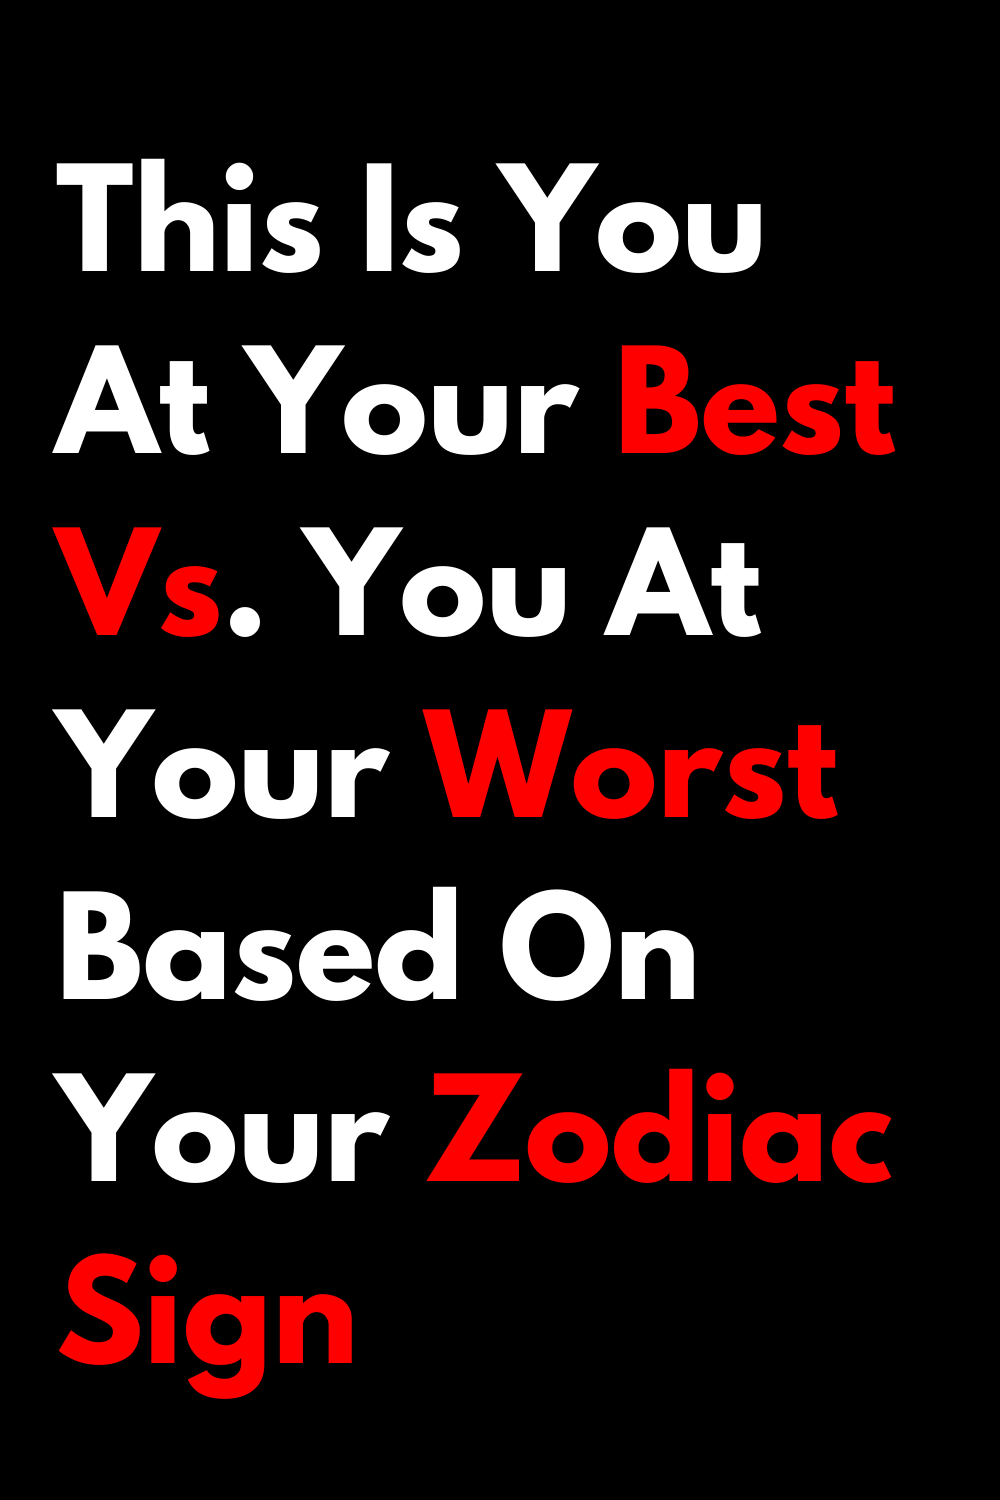 This Is You At Your Best Vs. You At Your Worst Based On Your Zodiac Sign